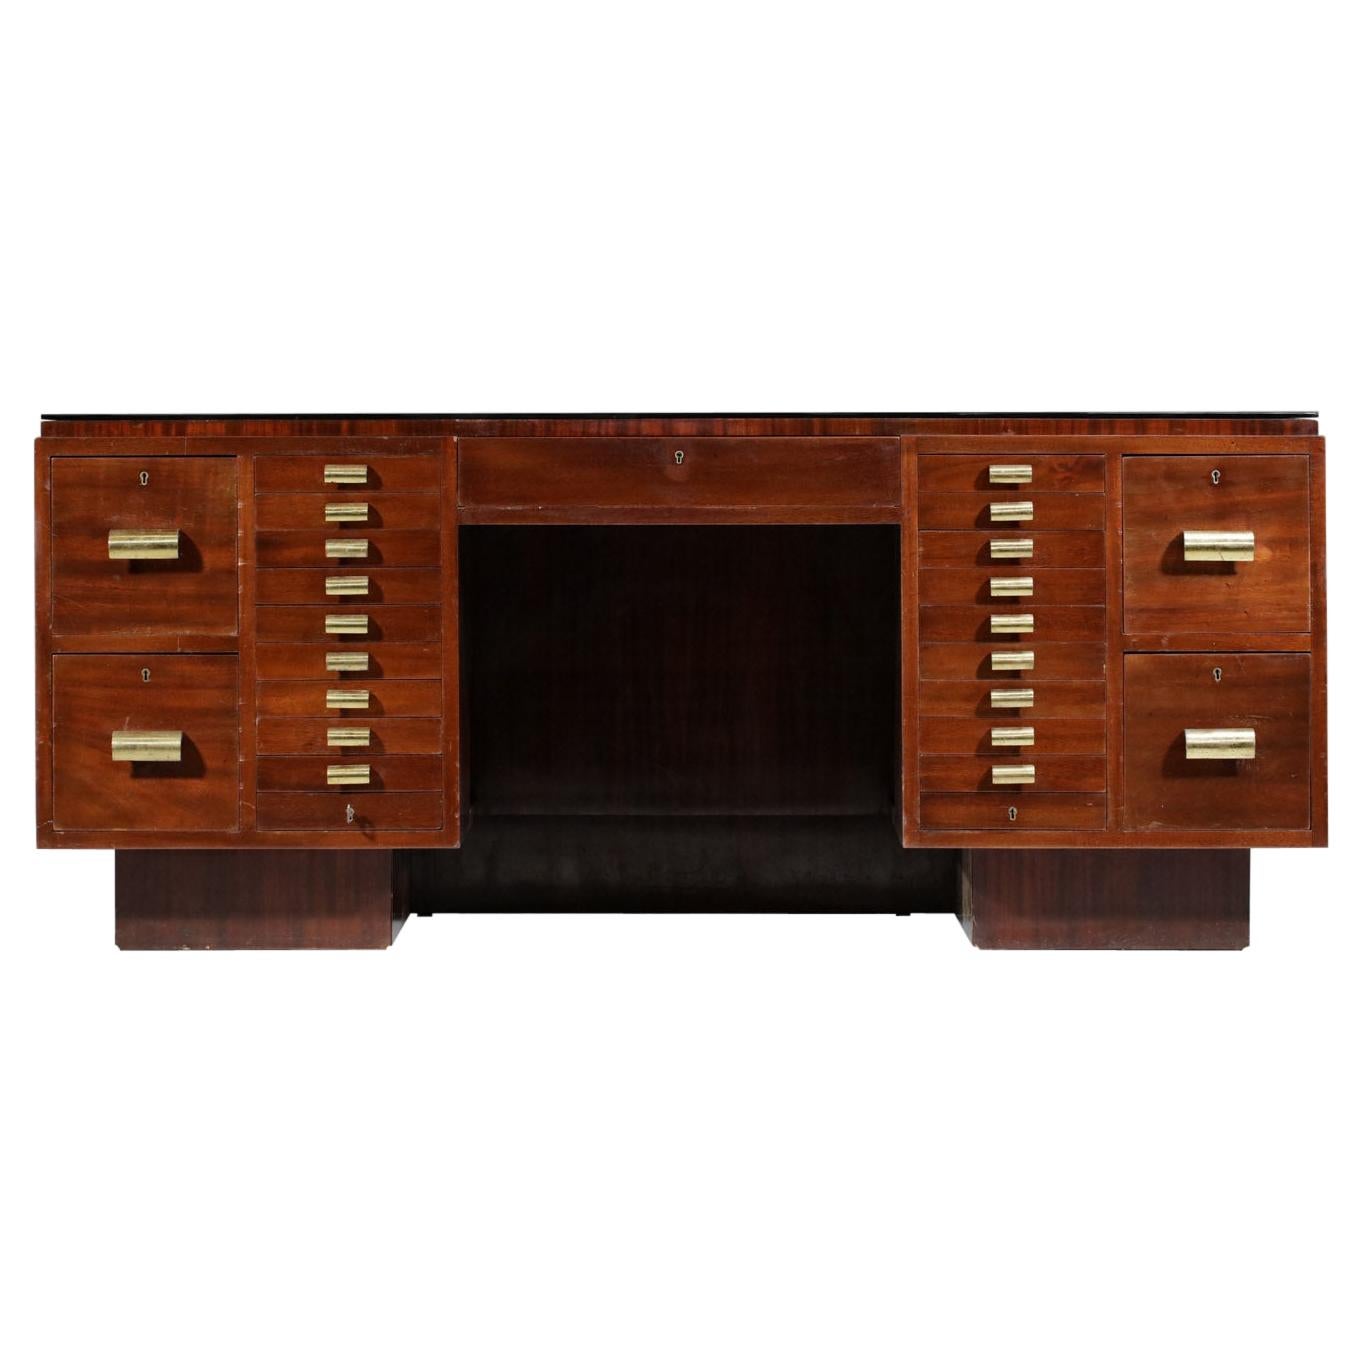 Imposing 1940's French Modernist Desk in Mahogany in Style of Dupré Lafon, E498 For Sale